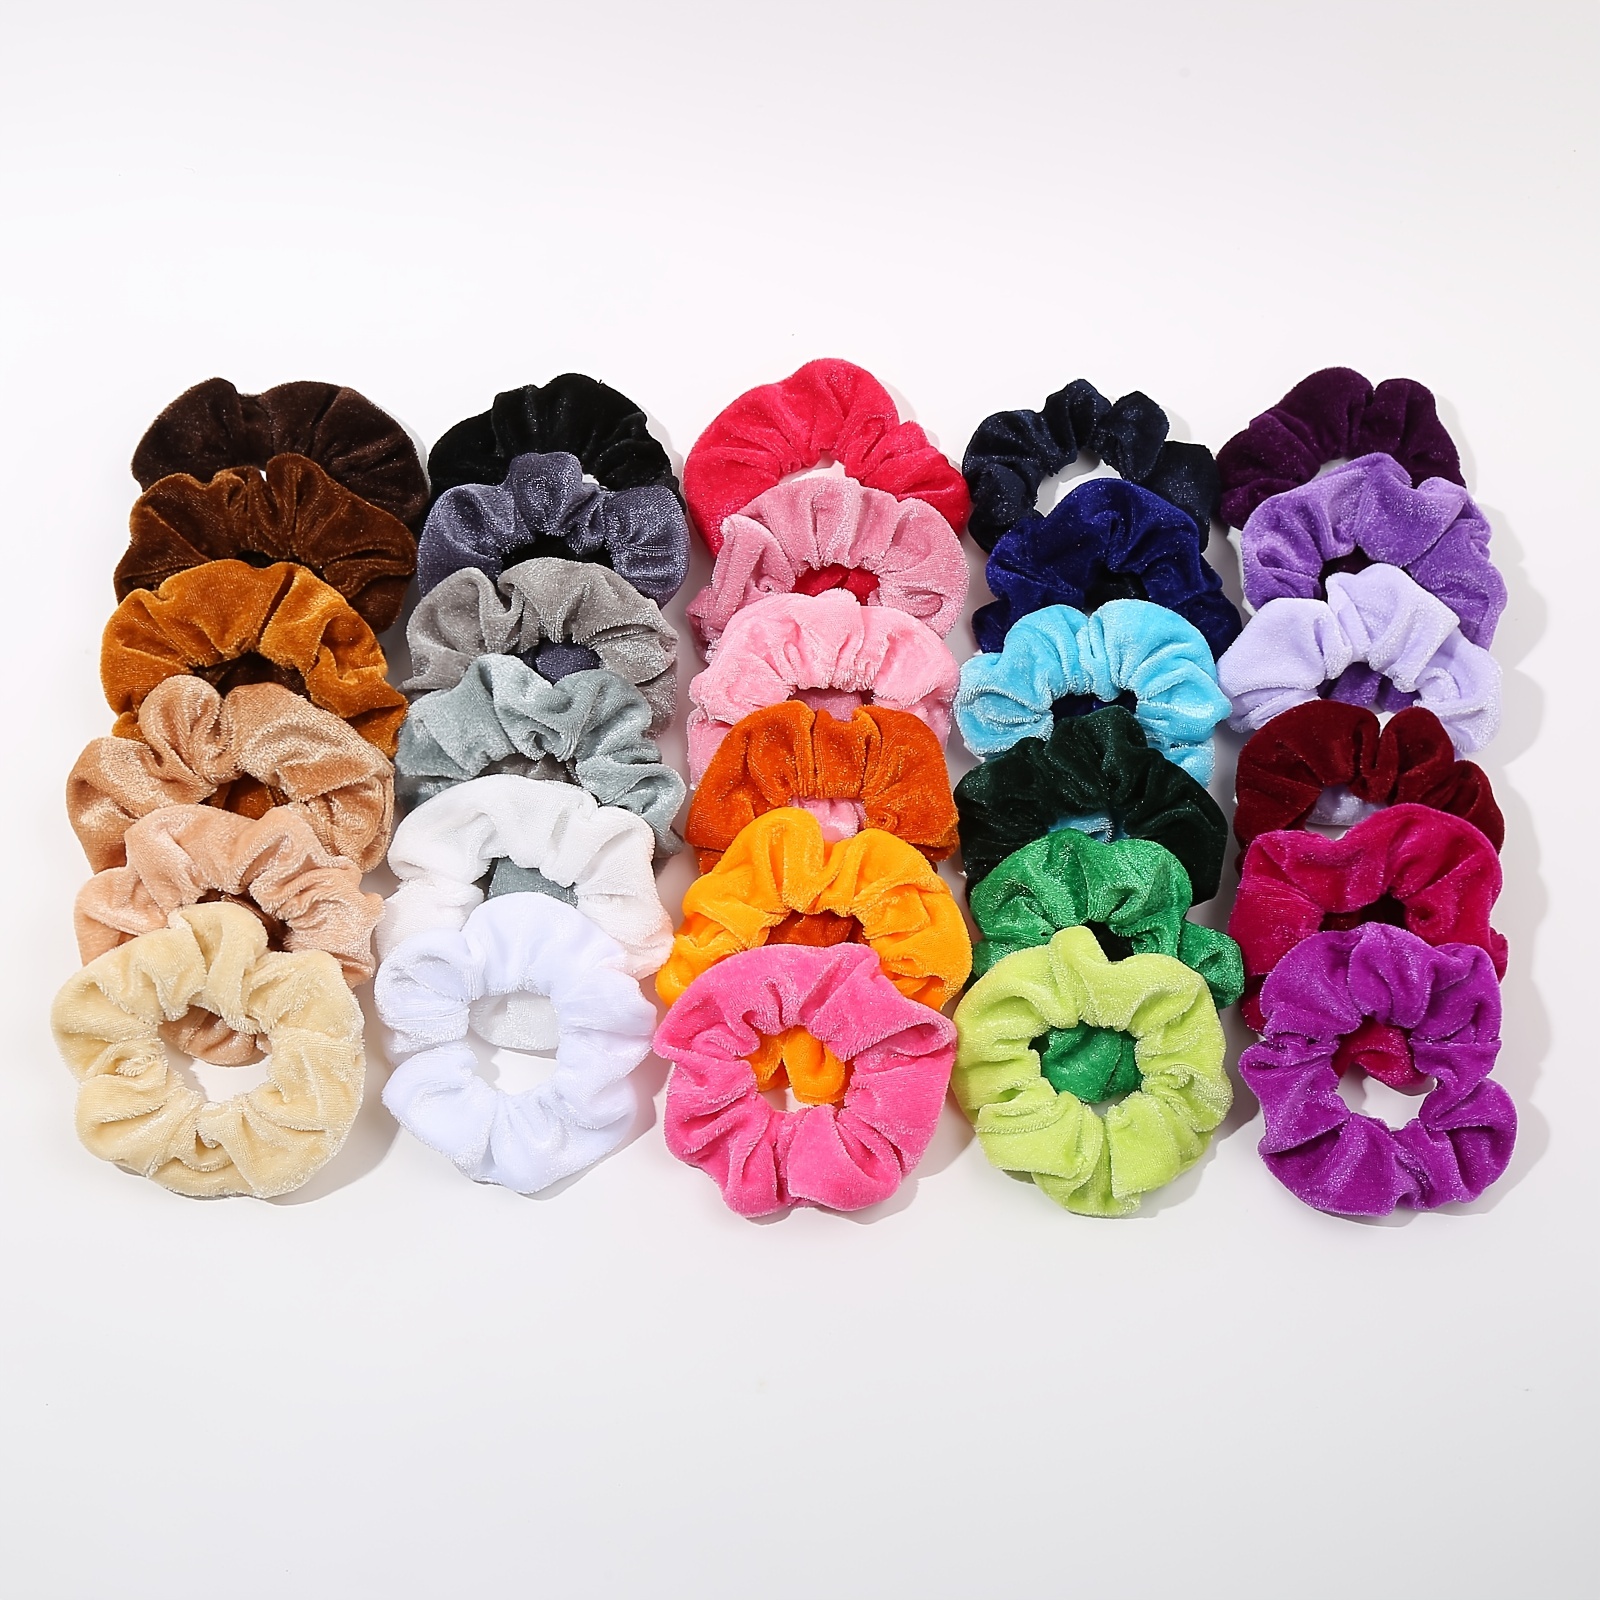 

30pcs Velvet Hair Scrunchies Hair Bands For Women Or Female Hair Accessories With Gift Bag Pack, Fluffy Soft Great Gift For Holiday Seasons